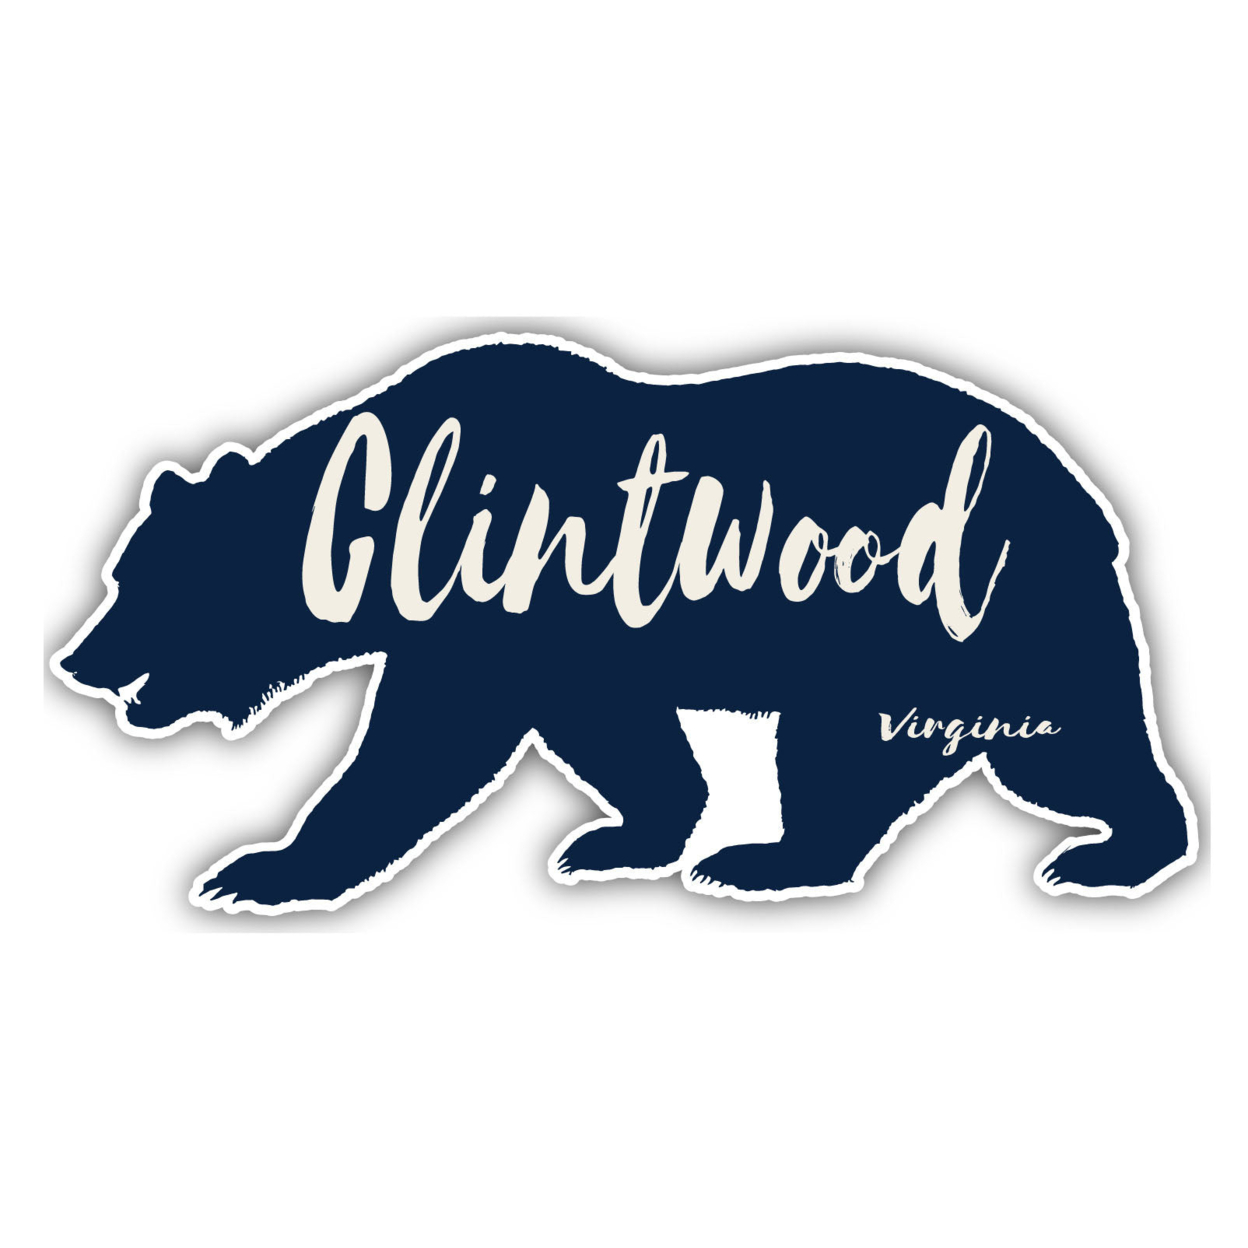 Clintwood Virginia Souvenir Decorative Stickers (Choose Theme And Size) - 4-Pack, 12-Inch, Bear